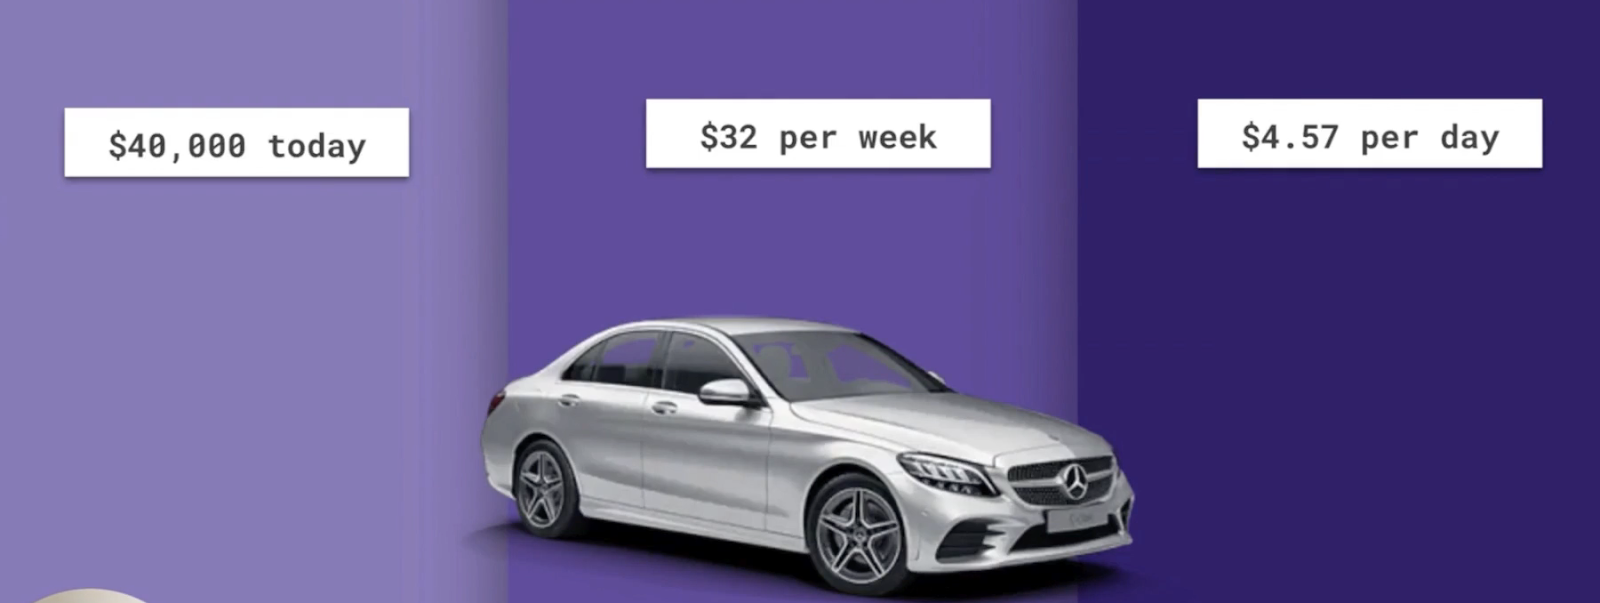 A cost of a Mercedes Benz broke down using hyperbolic discounting.